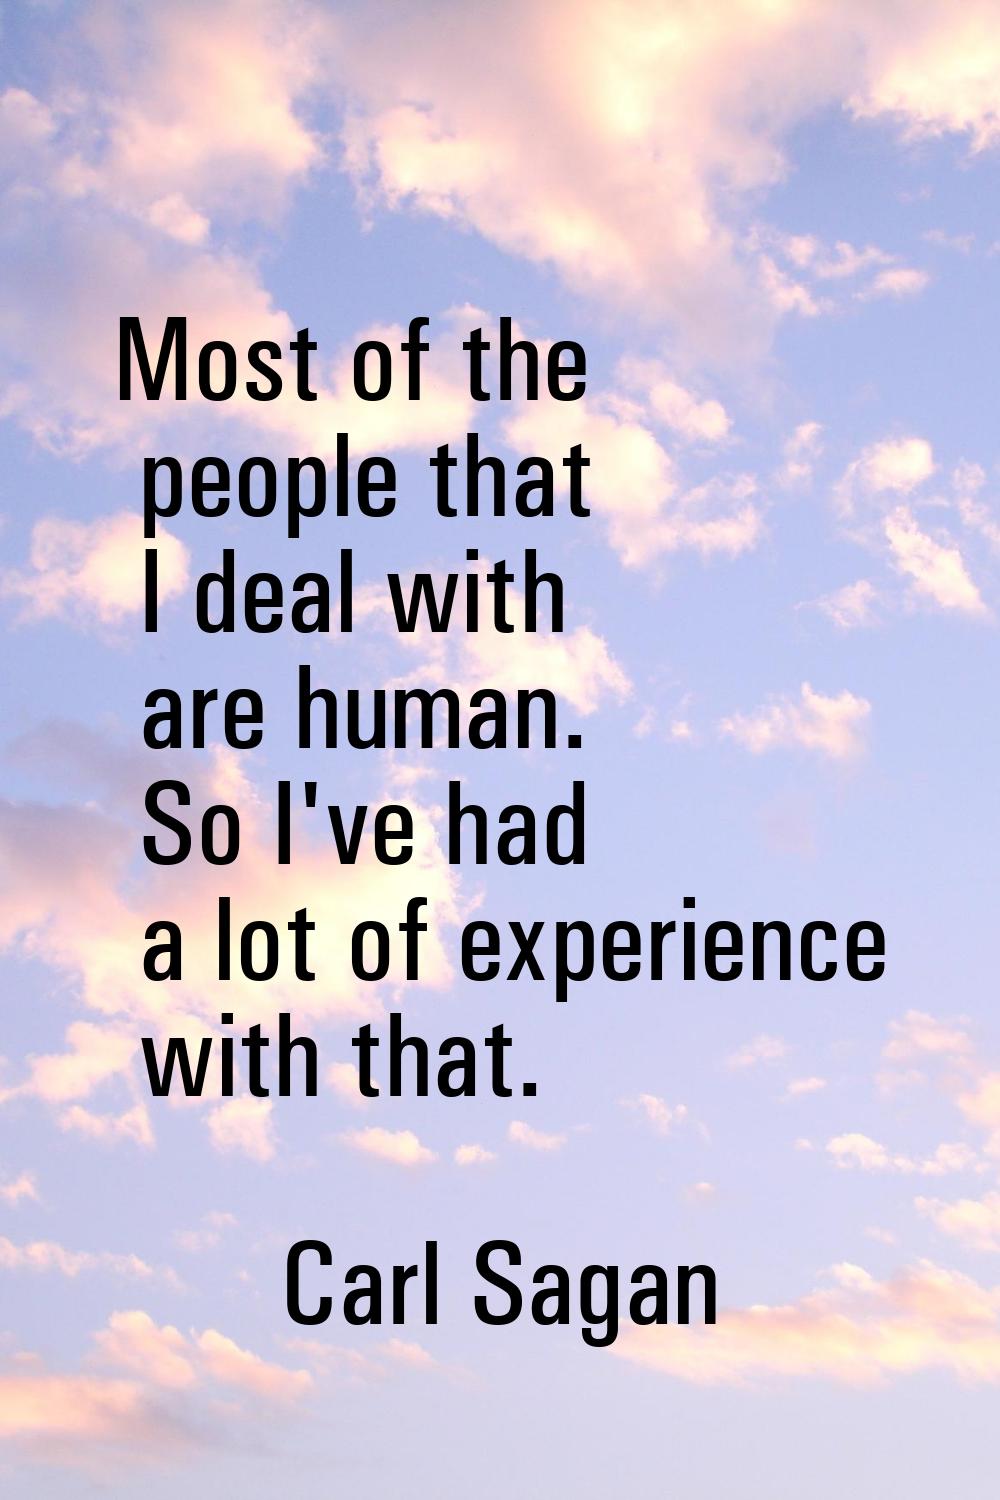 Most of the people that I deal with are human. So I've had a lot of experience with that.